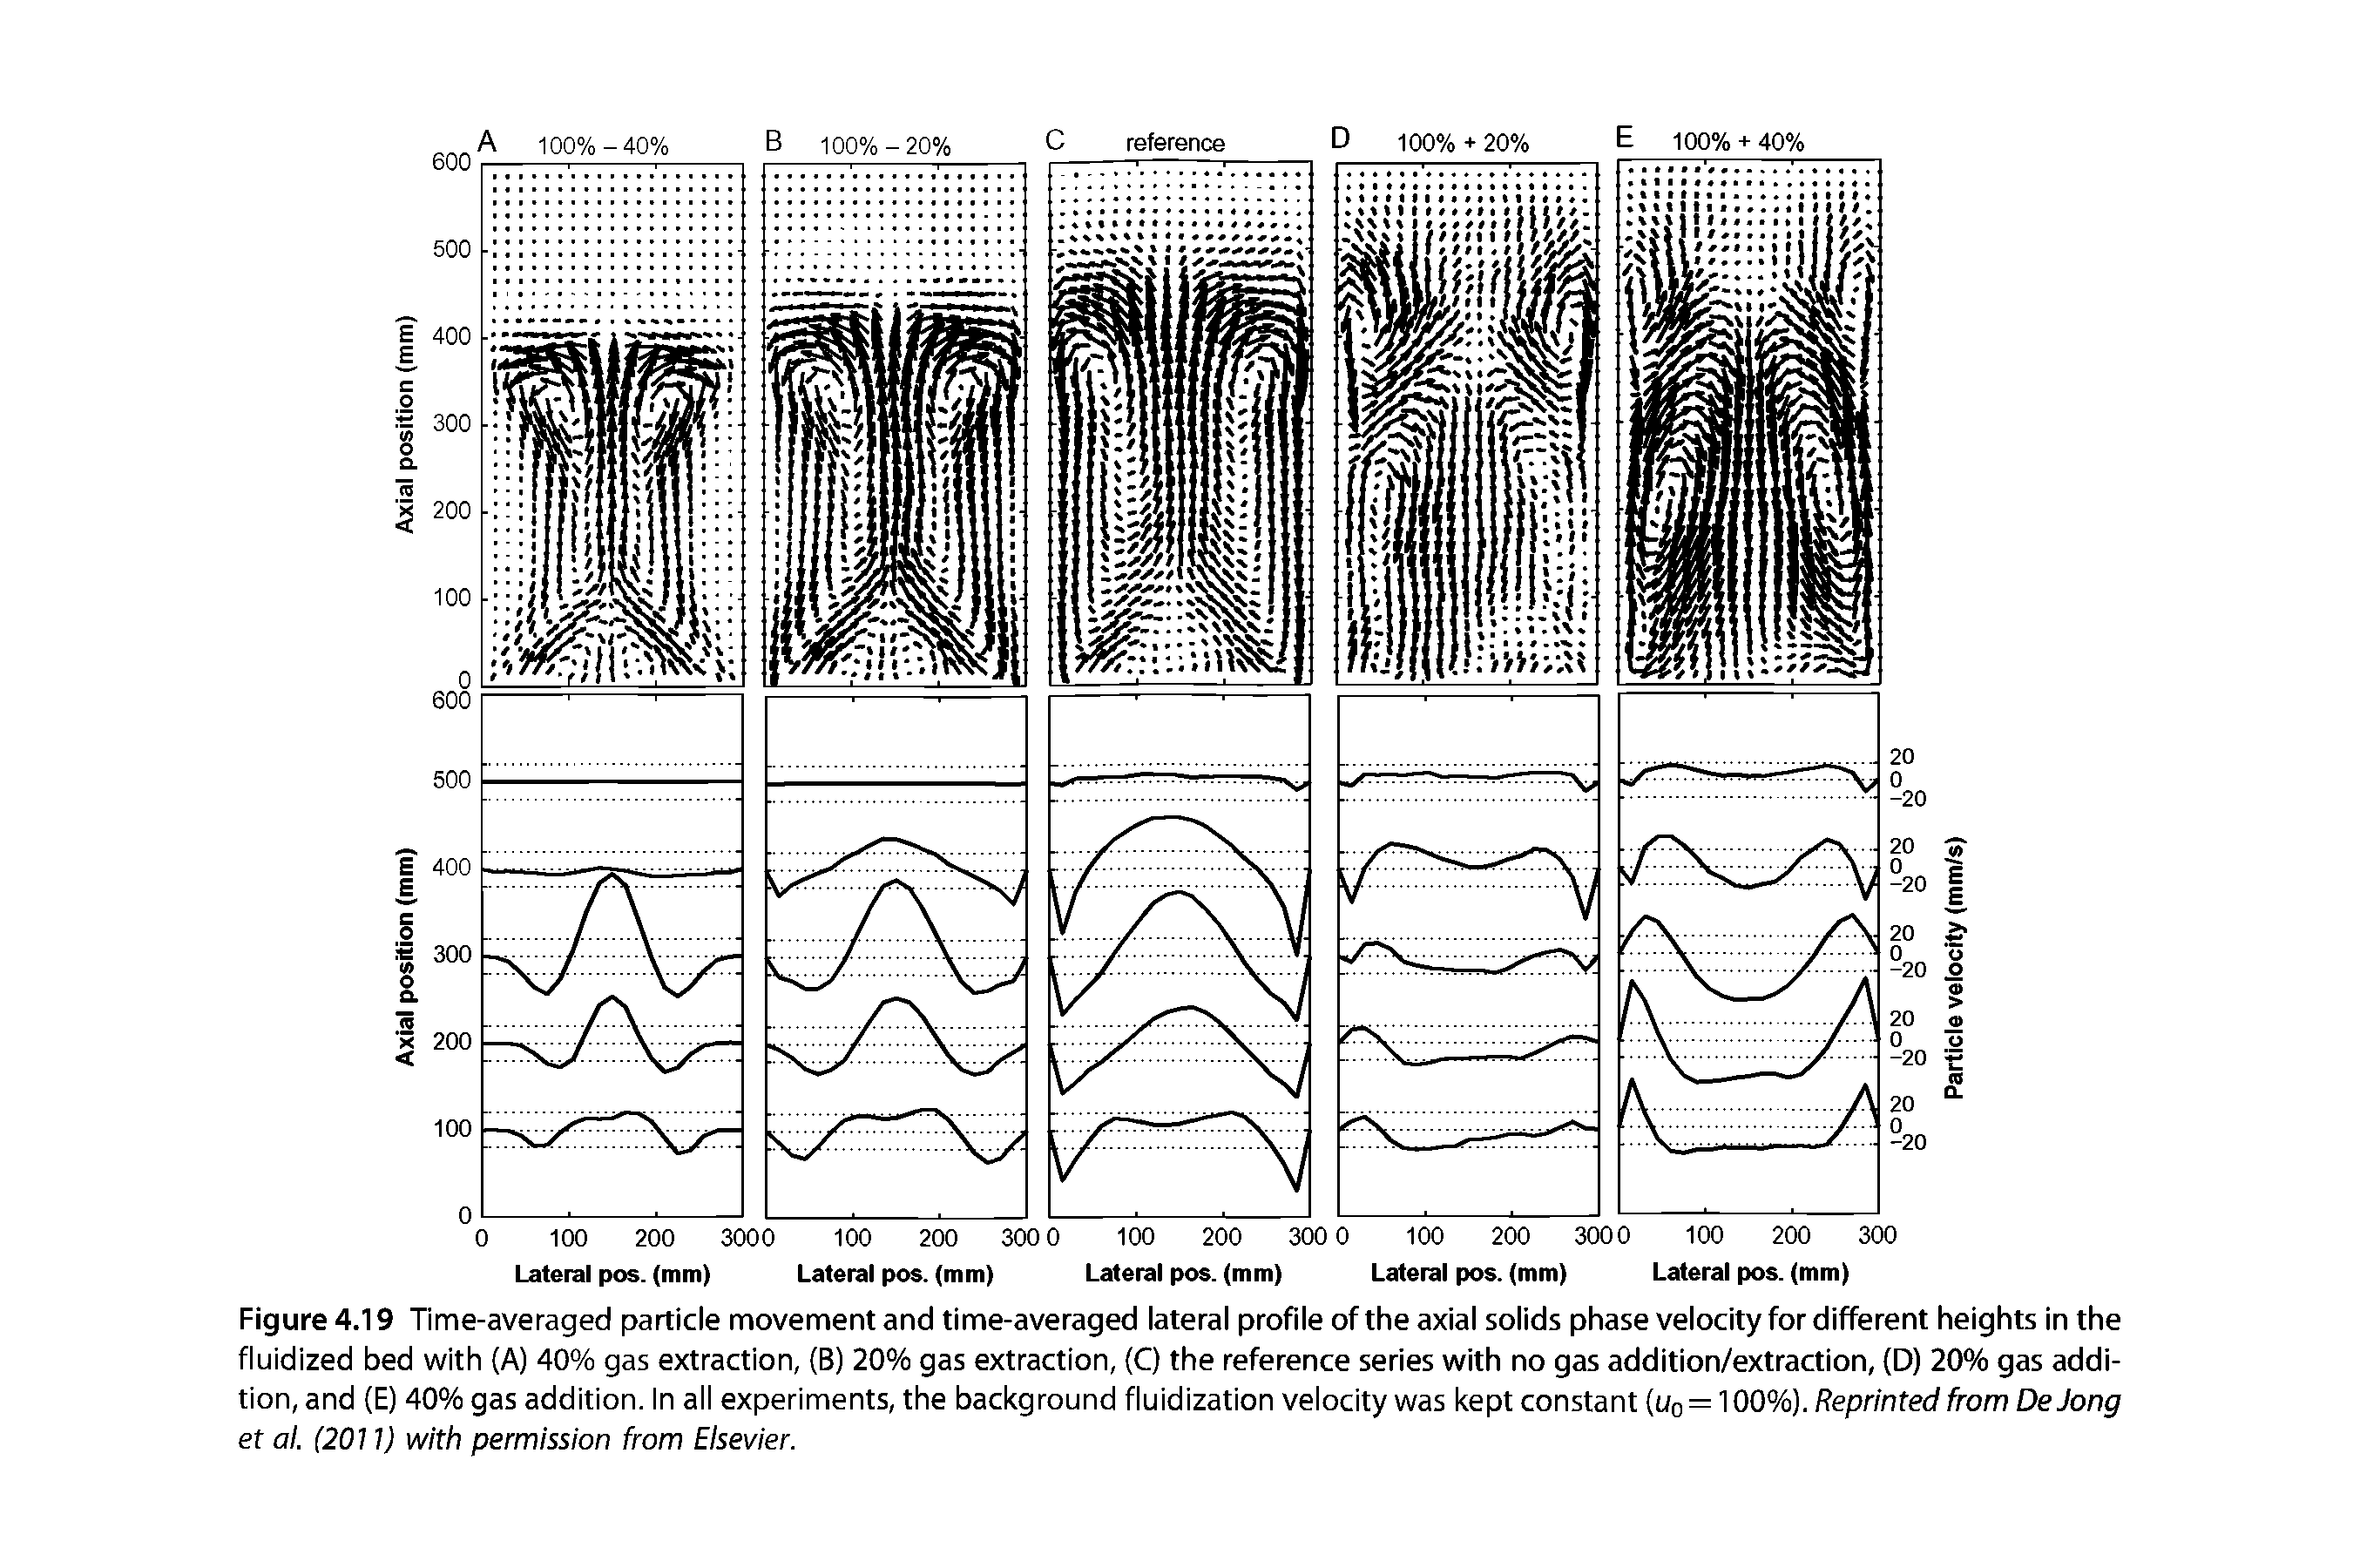 Figure 4.19 Time-averaged particle movement and time-averaged lateral profile of the axial solids phase velocity for different heights in the fluidized bed with (A) 40% gas extraction, (B) 20% gas extraction, (C) the reference series with no gas addition/extraction, (D) 20% gas addition, and (E) 40% gas addition, in all experiments, the background fluidization veiocity was kept constant (uo = 100%). Reprinted from DeJong et al. (2011) with permission from Elsevier.